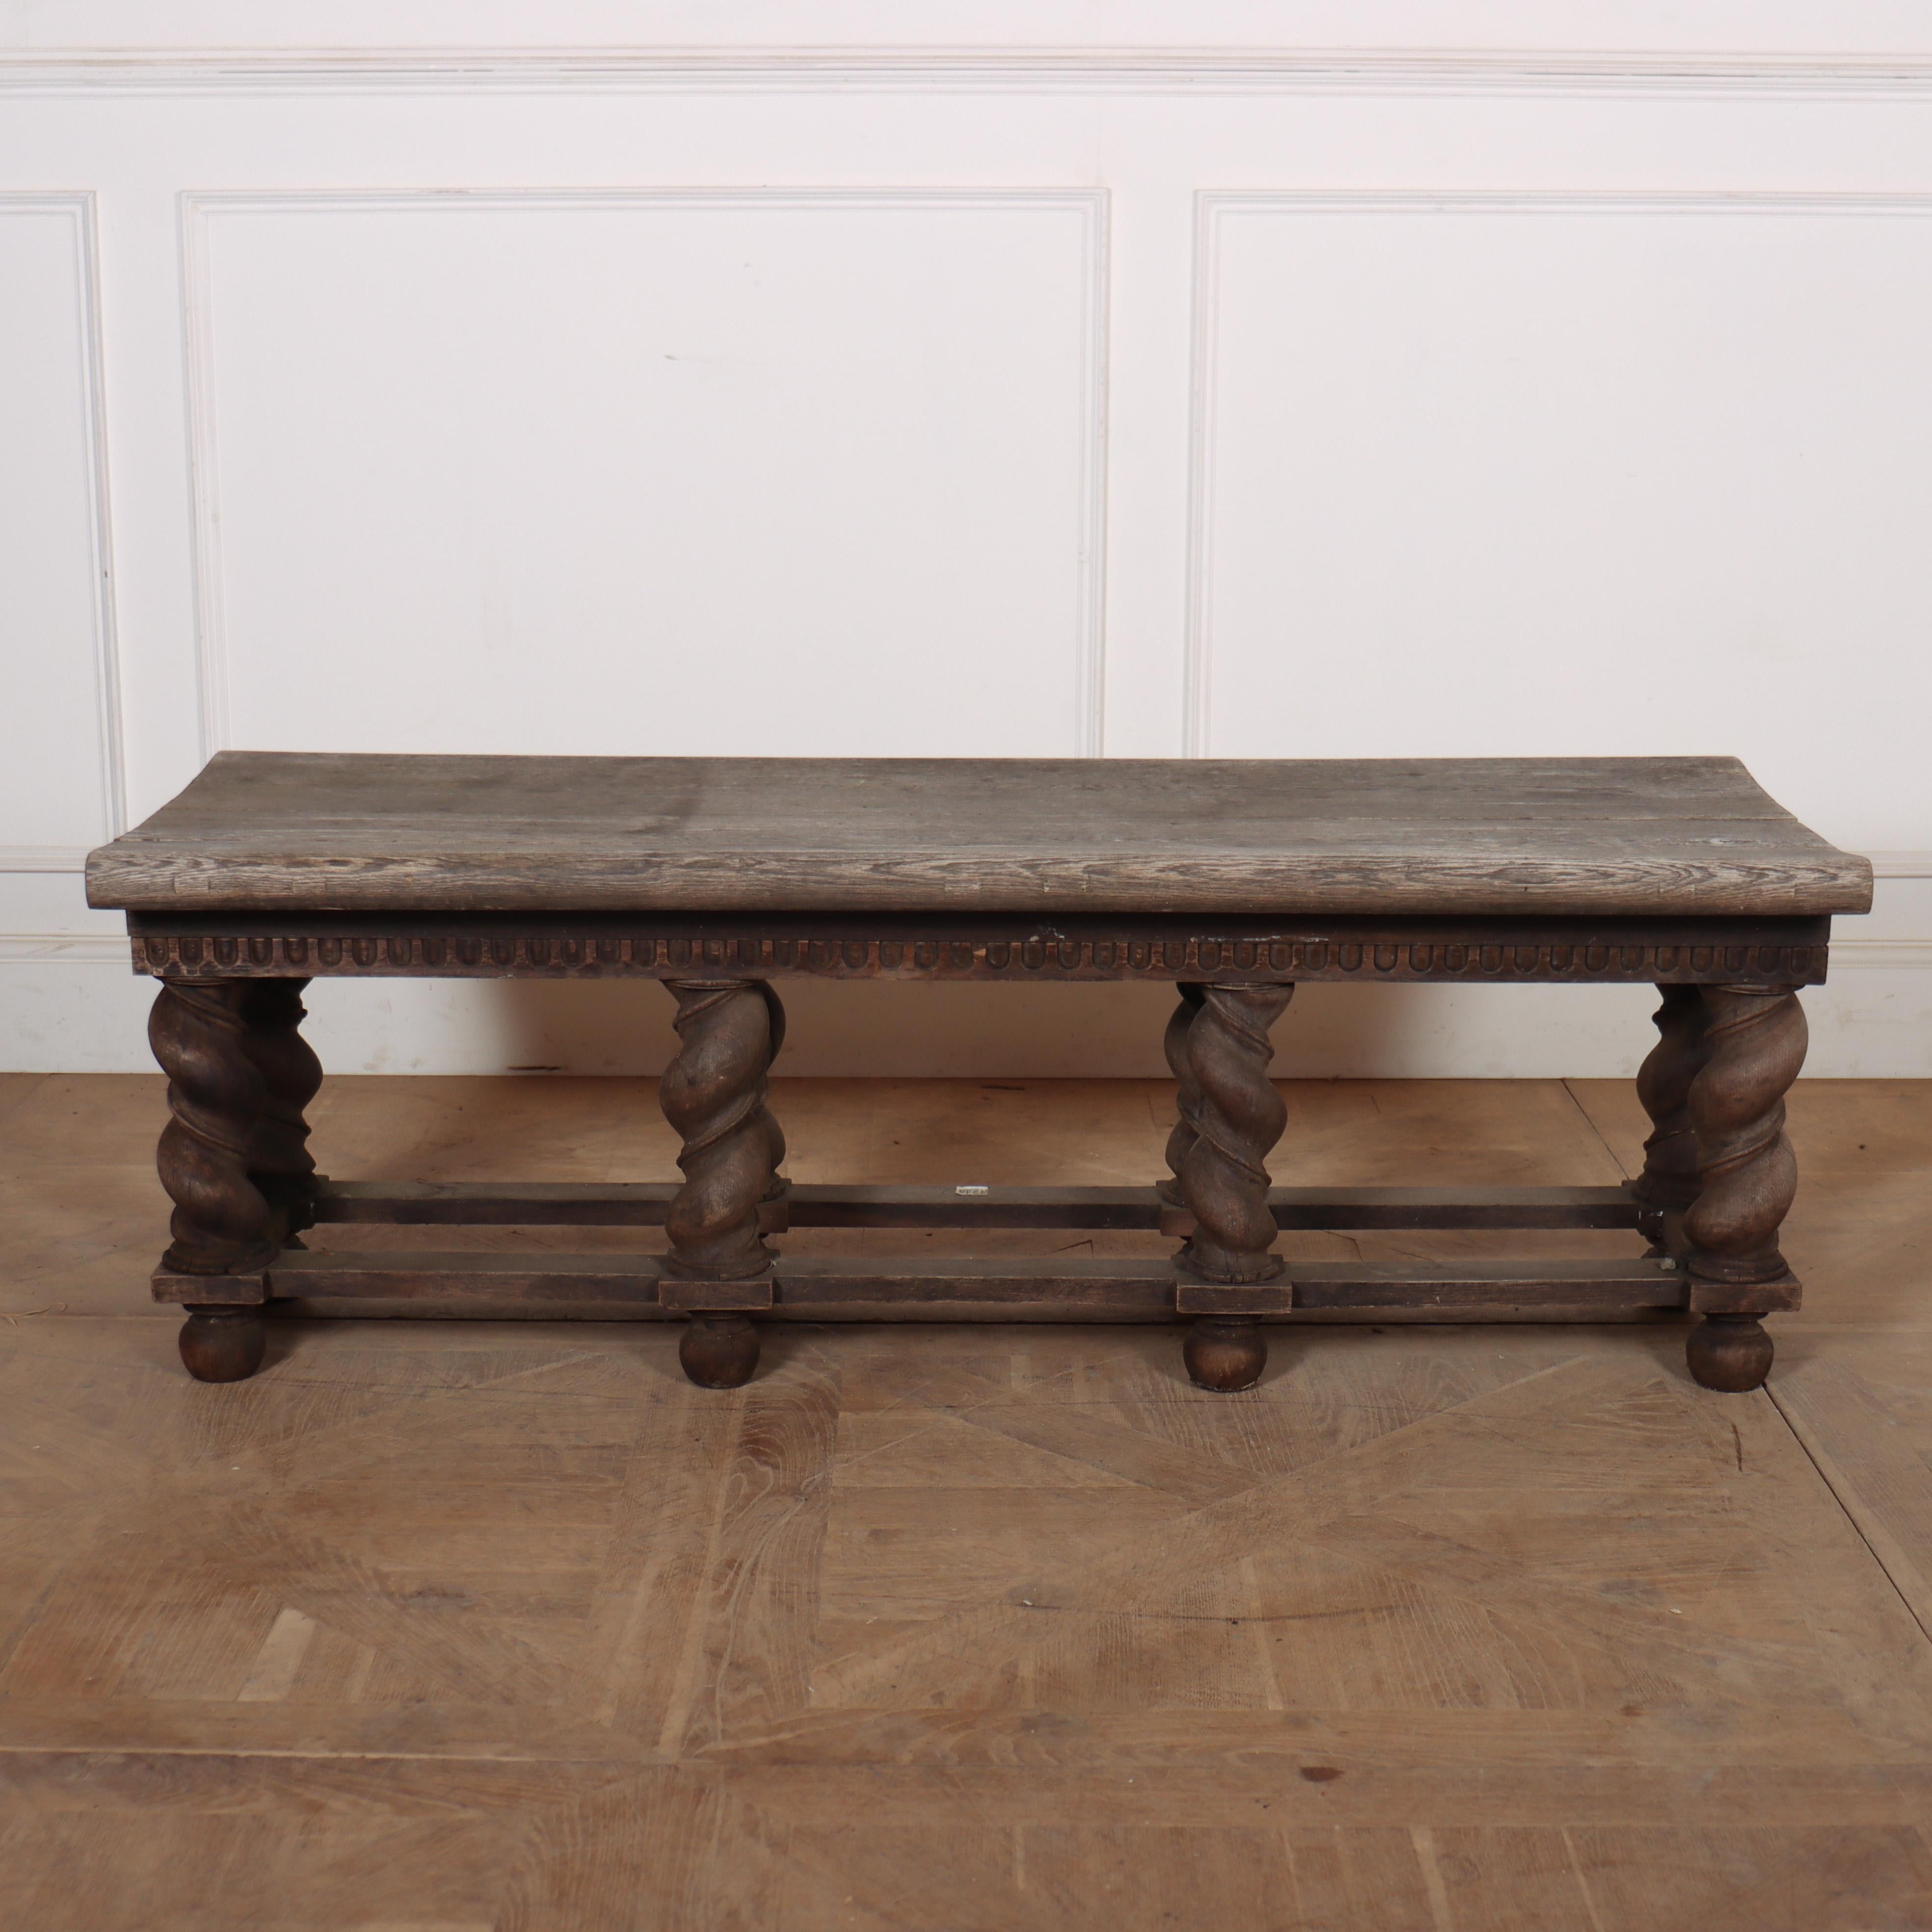 19th C French weathered oak stool with a lovely worn grey finish. 1860

Reference: 8335

Dimensions
58.5 inches (149 cms) Wide
21 inches (53 cms) Deep
20.5 inches (52 cms) High